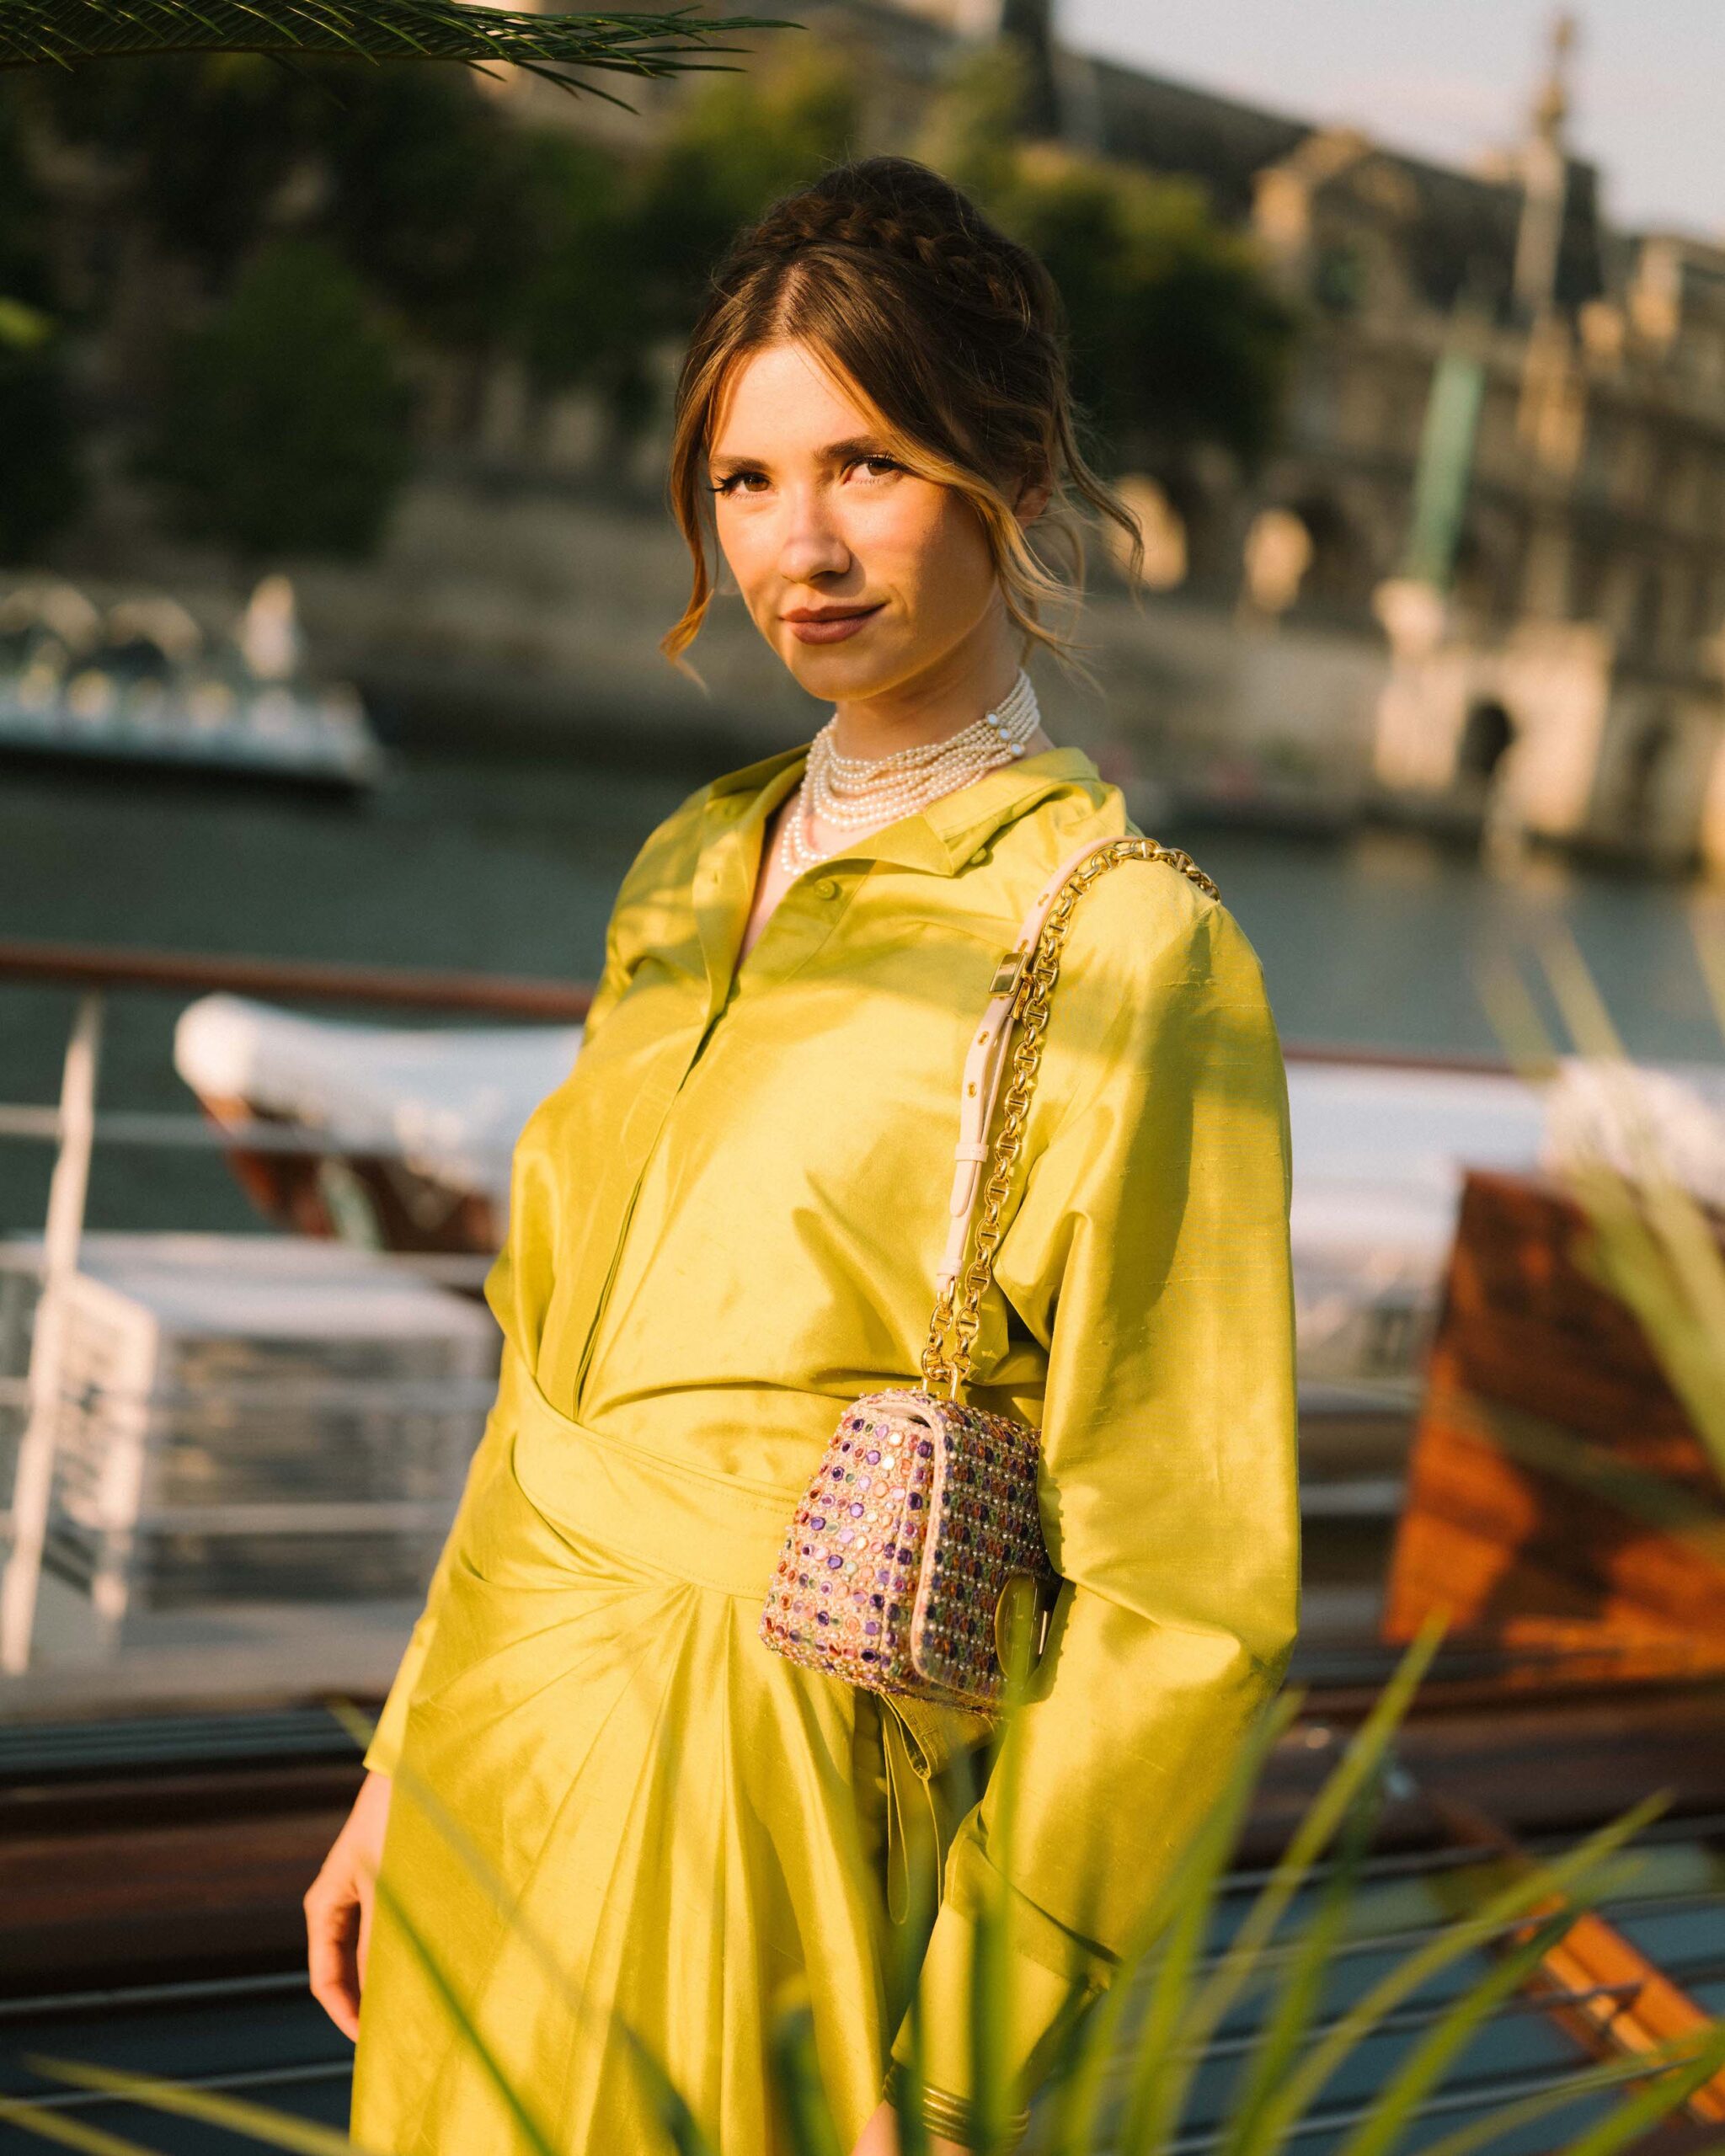 Zita d'Hauteville in Dior Pre Fall 2023 Zita d'Hauteville chose a vibrant yellow silk shirt and skirt from the Dior Pre Fall 2023 collection. She accessorized with a Dior bag and necklace.